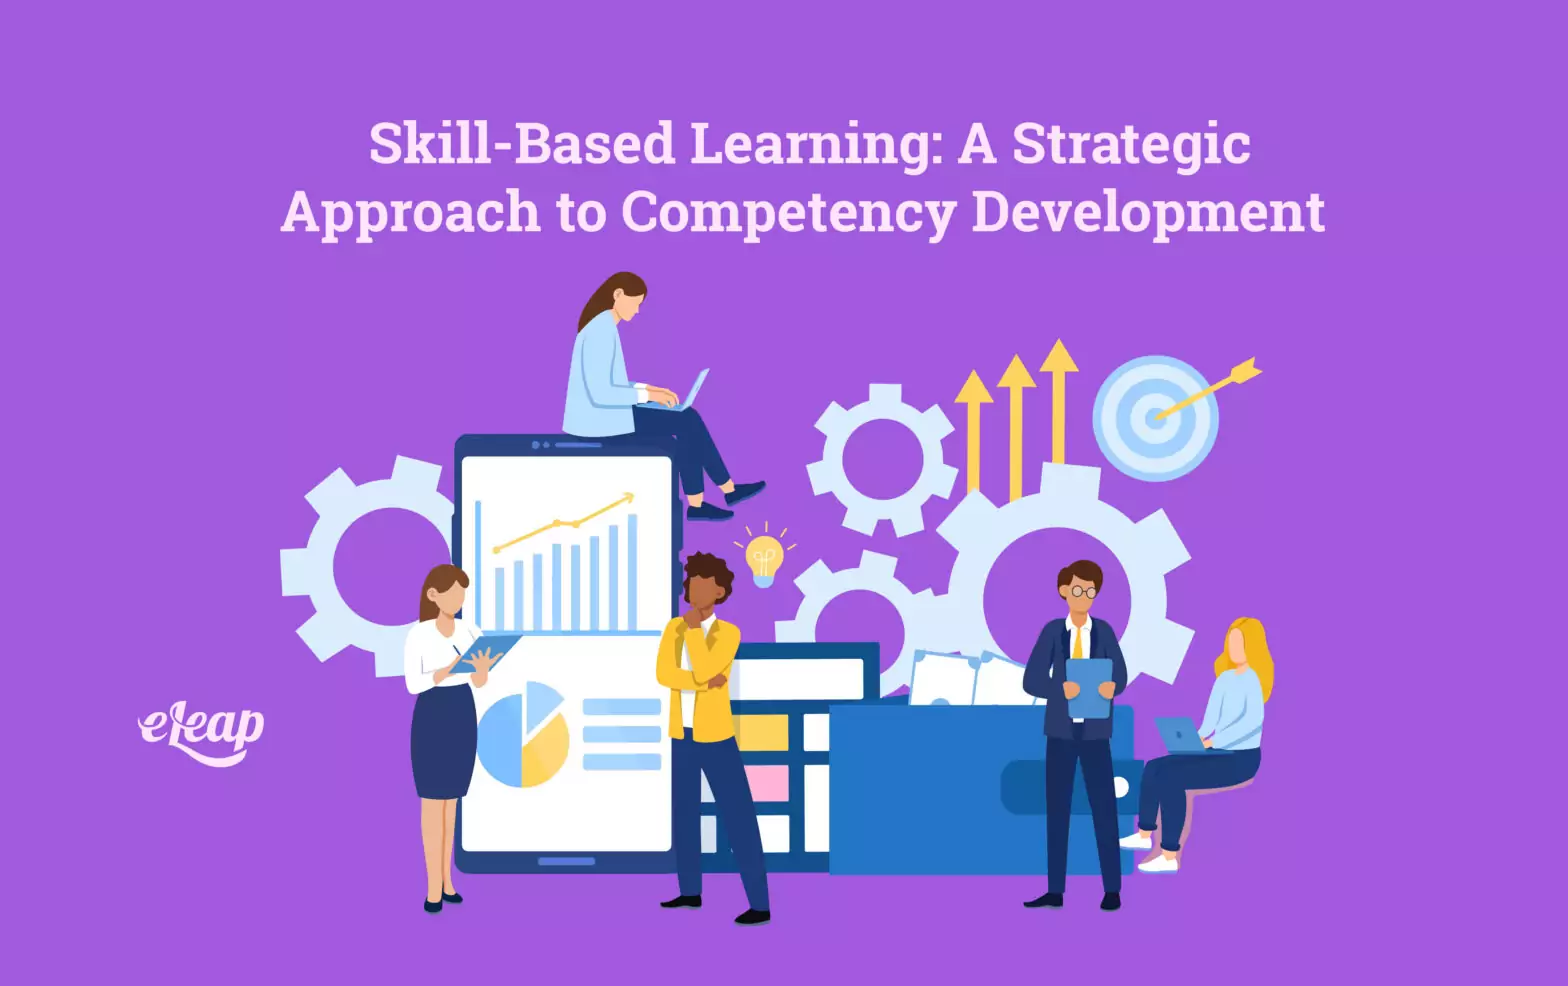 Skill-Based Learning: A Strategic Approach to Competency Development